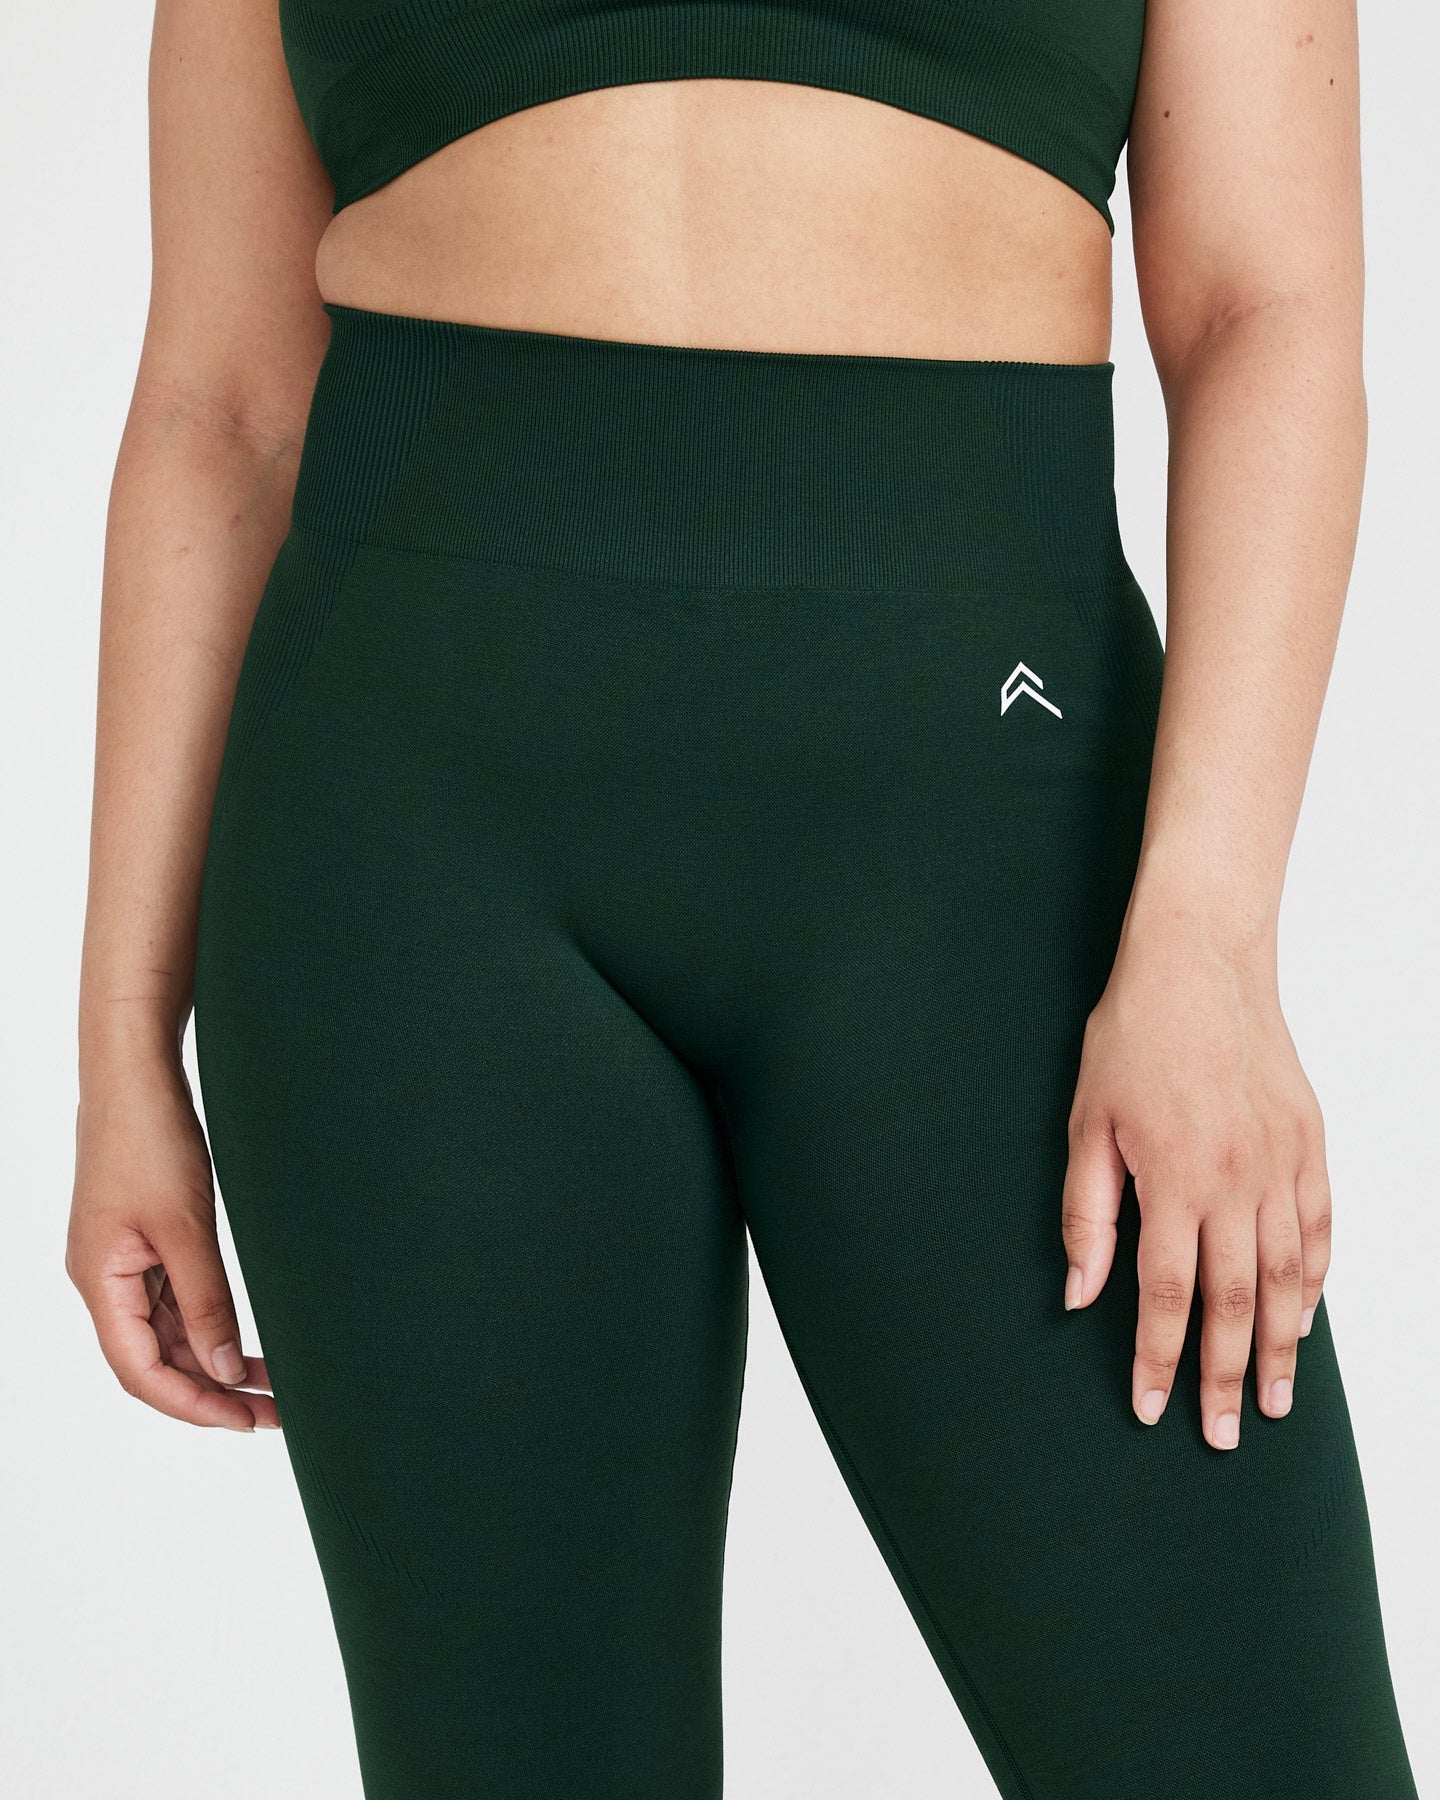 Apana Solid Green Leggings Size S - 62% off